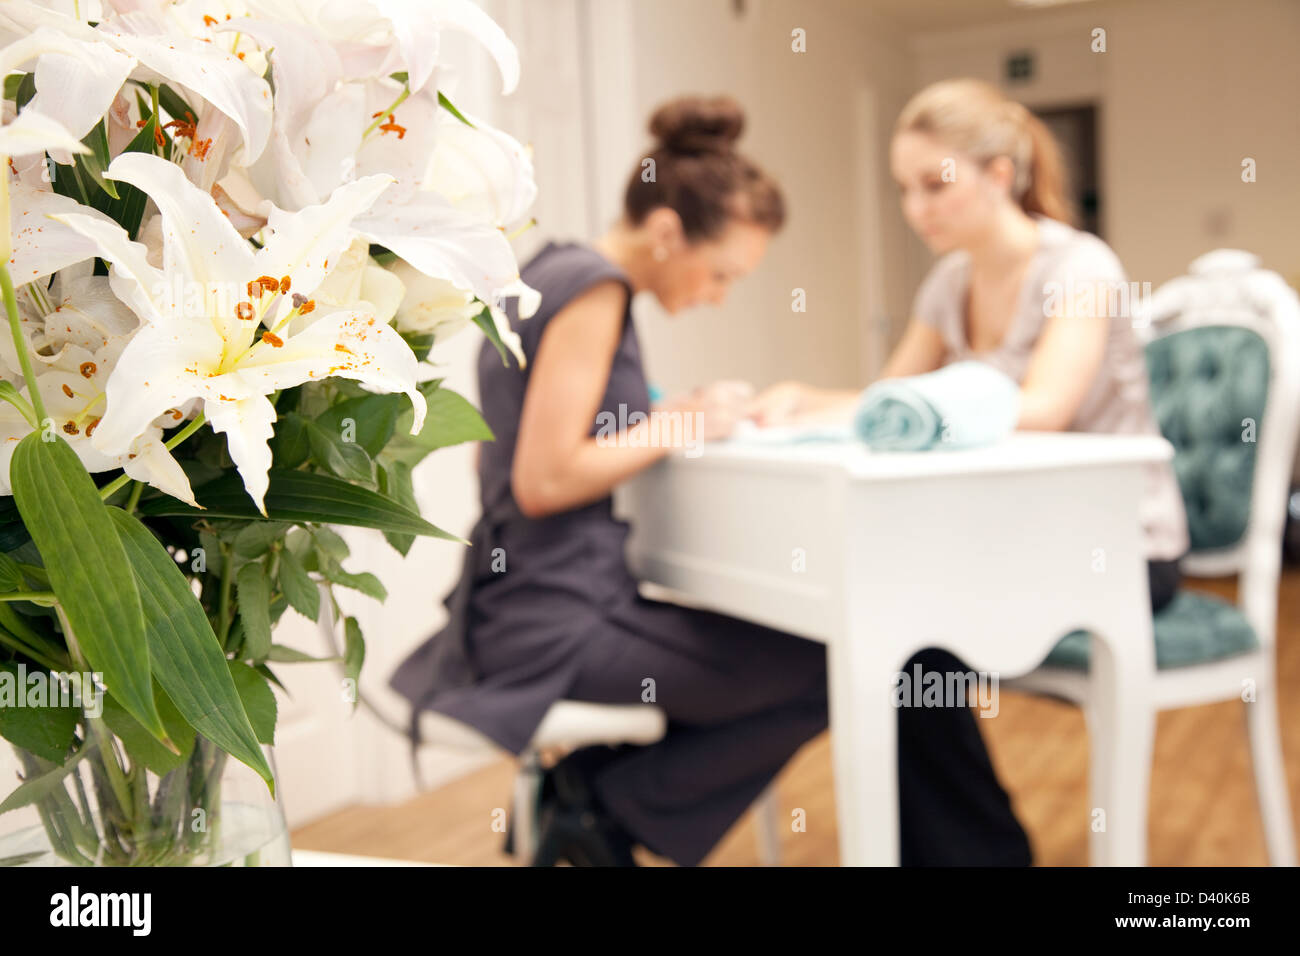 A young woman having her nails painted in a beauty salon. The subjects are in the background with a vase of flowers to the left Stock Photo